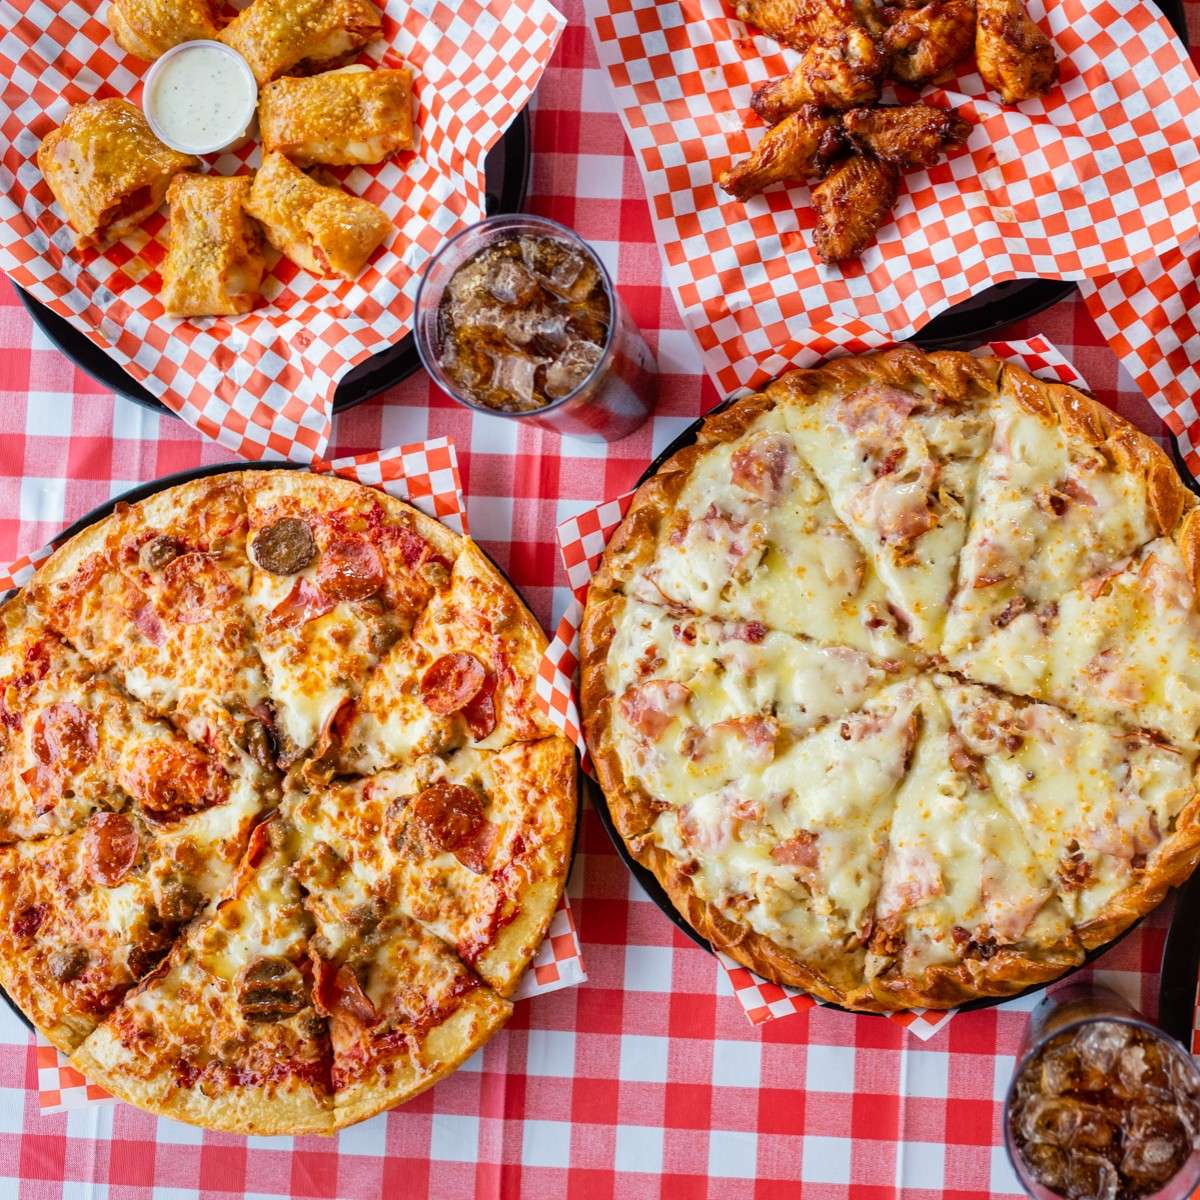 pizzas and appetizers